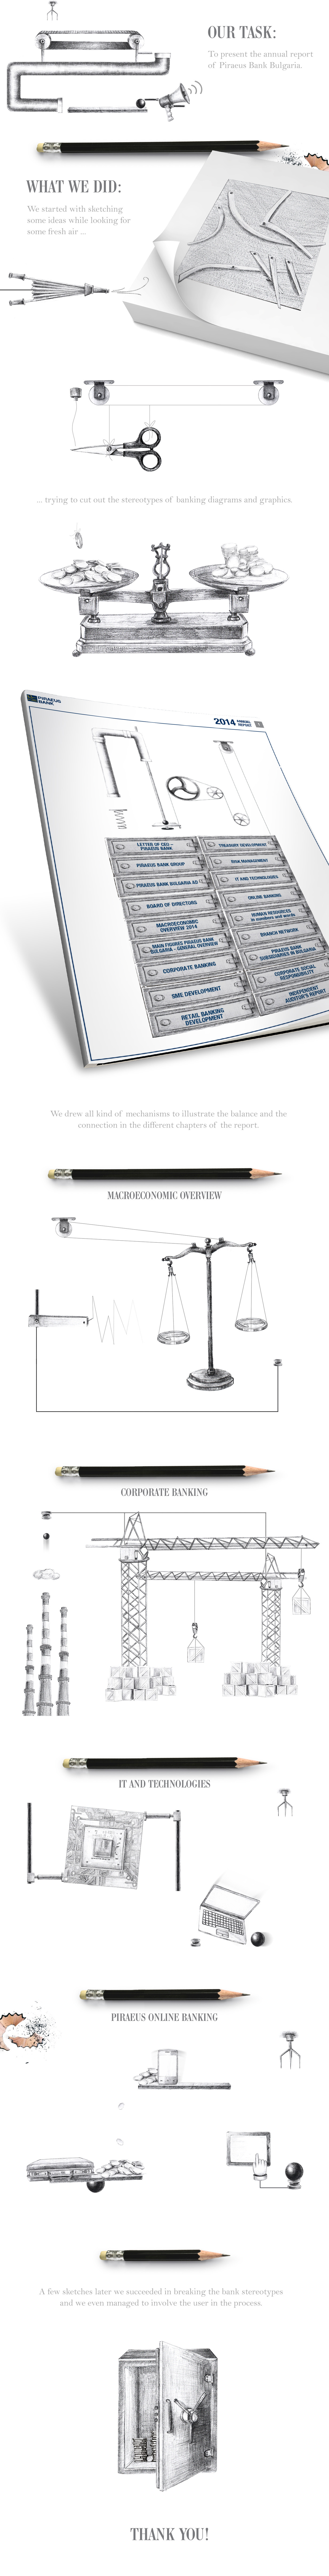 Bank sketch annual report mechanisms balance bank structures pencil